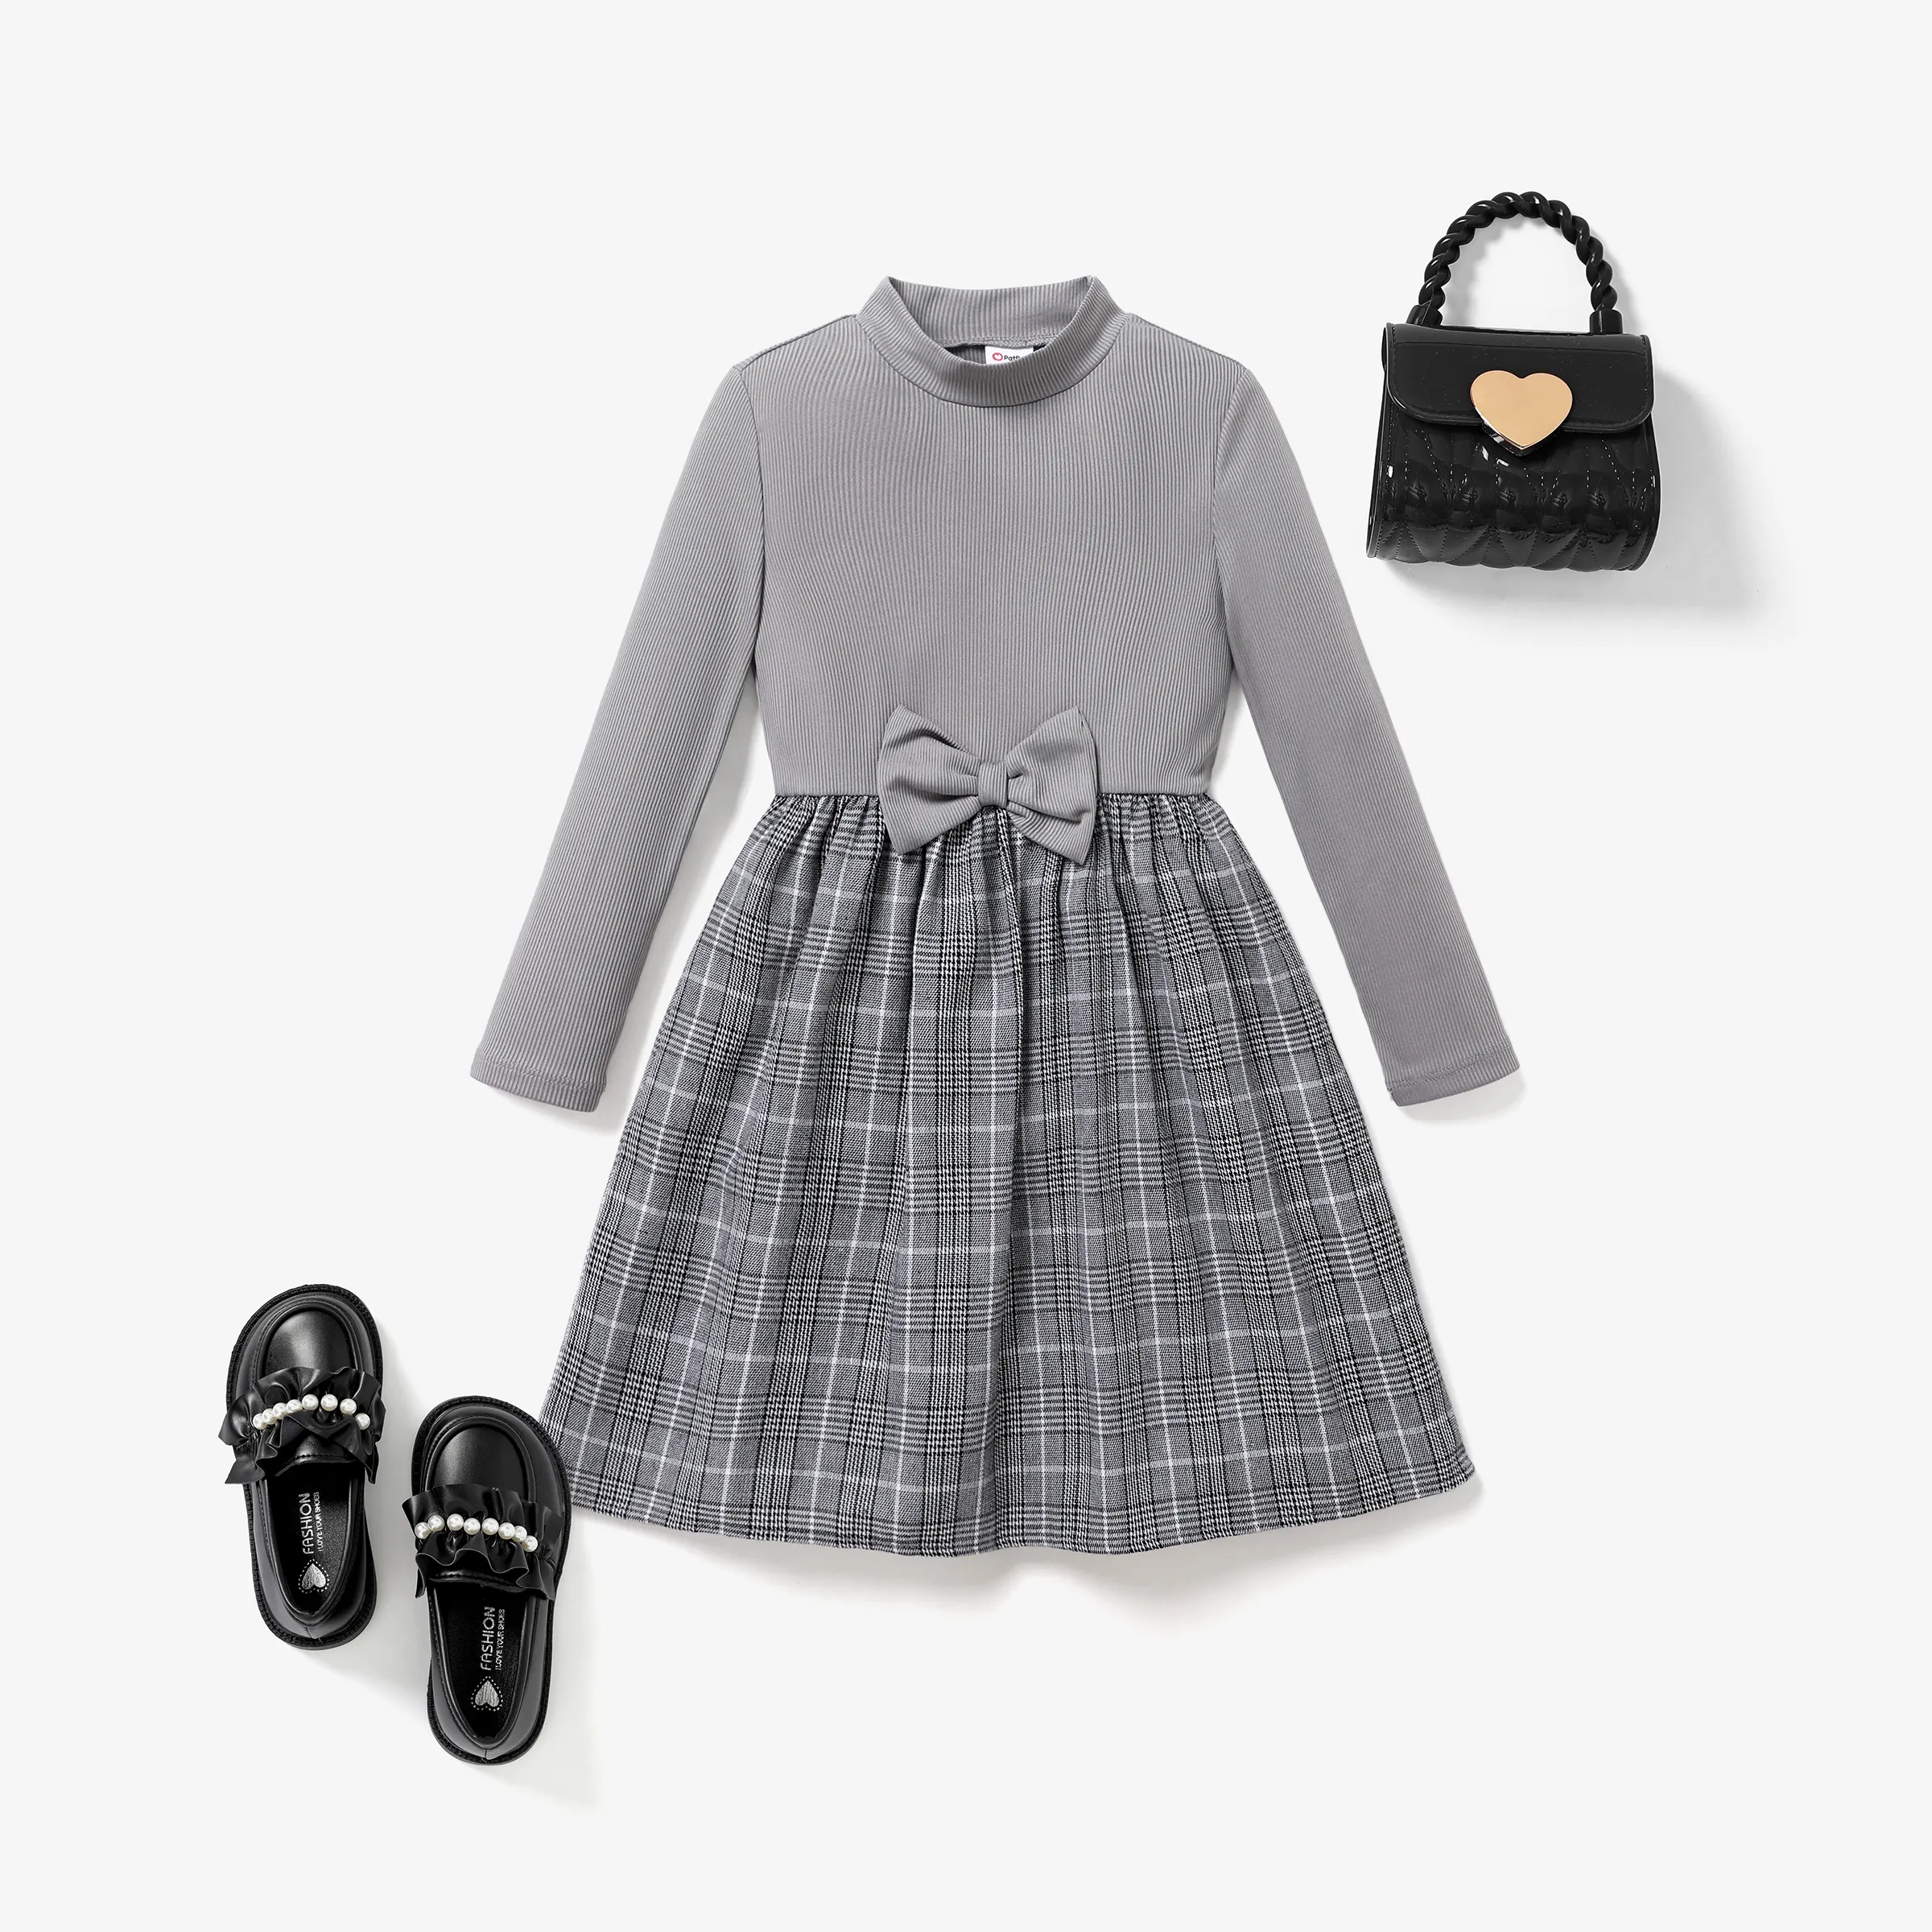 Kid Girl Preppy Style Turtle Neck Dress With Hyper-Tactile 3D Grid/Houndstooth Pattern And Bowknot Design